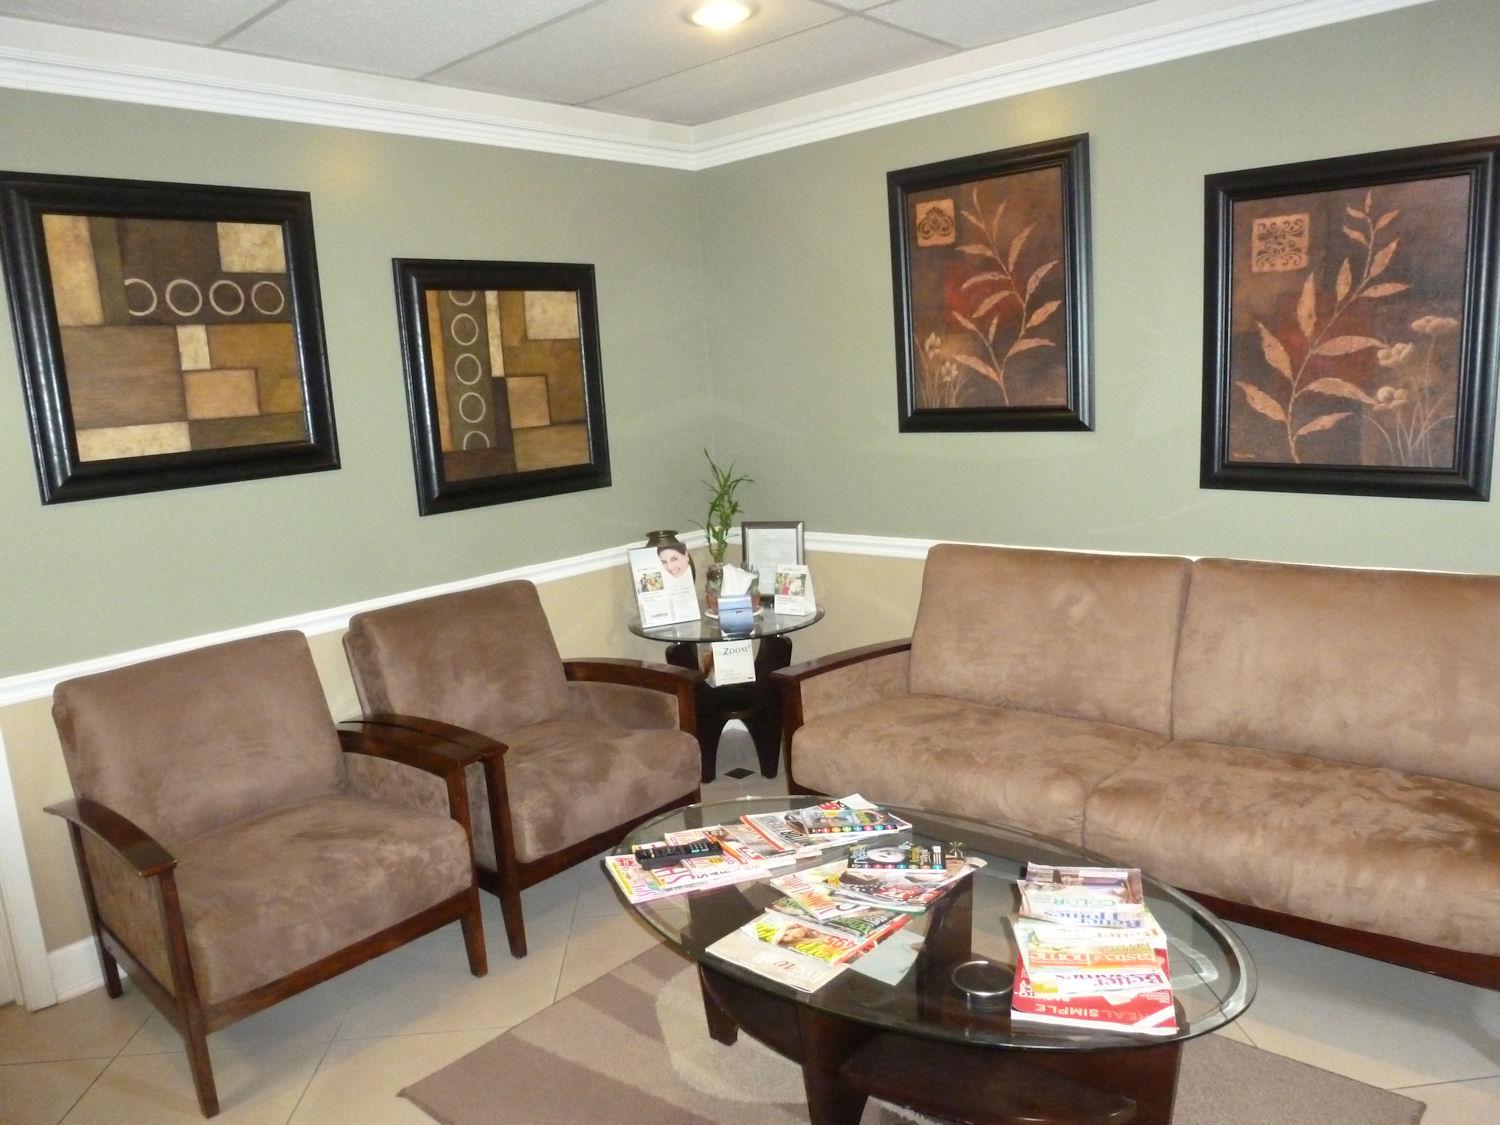 Front office waiting area